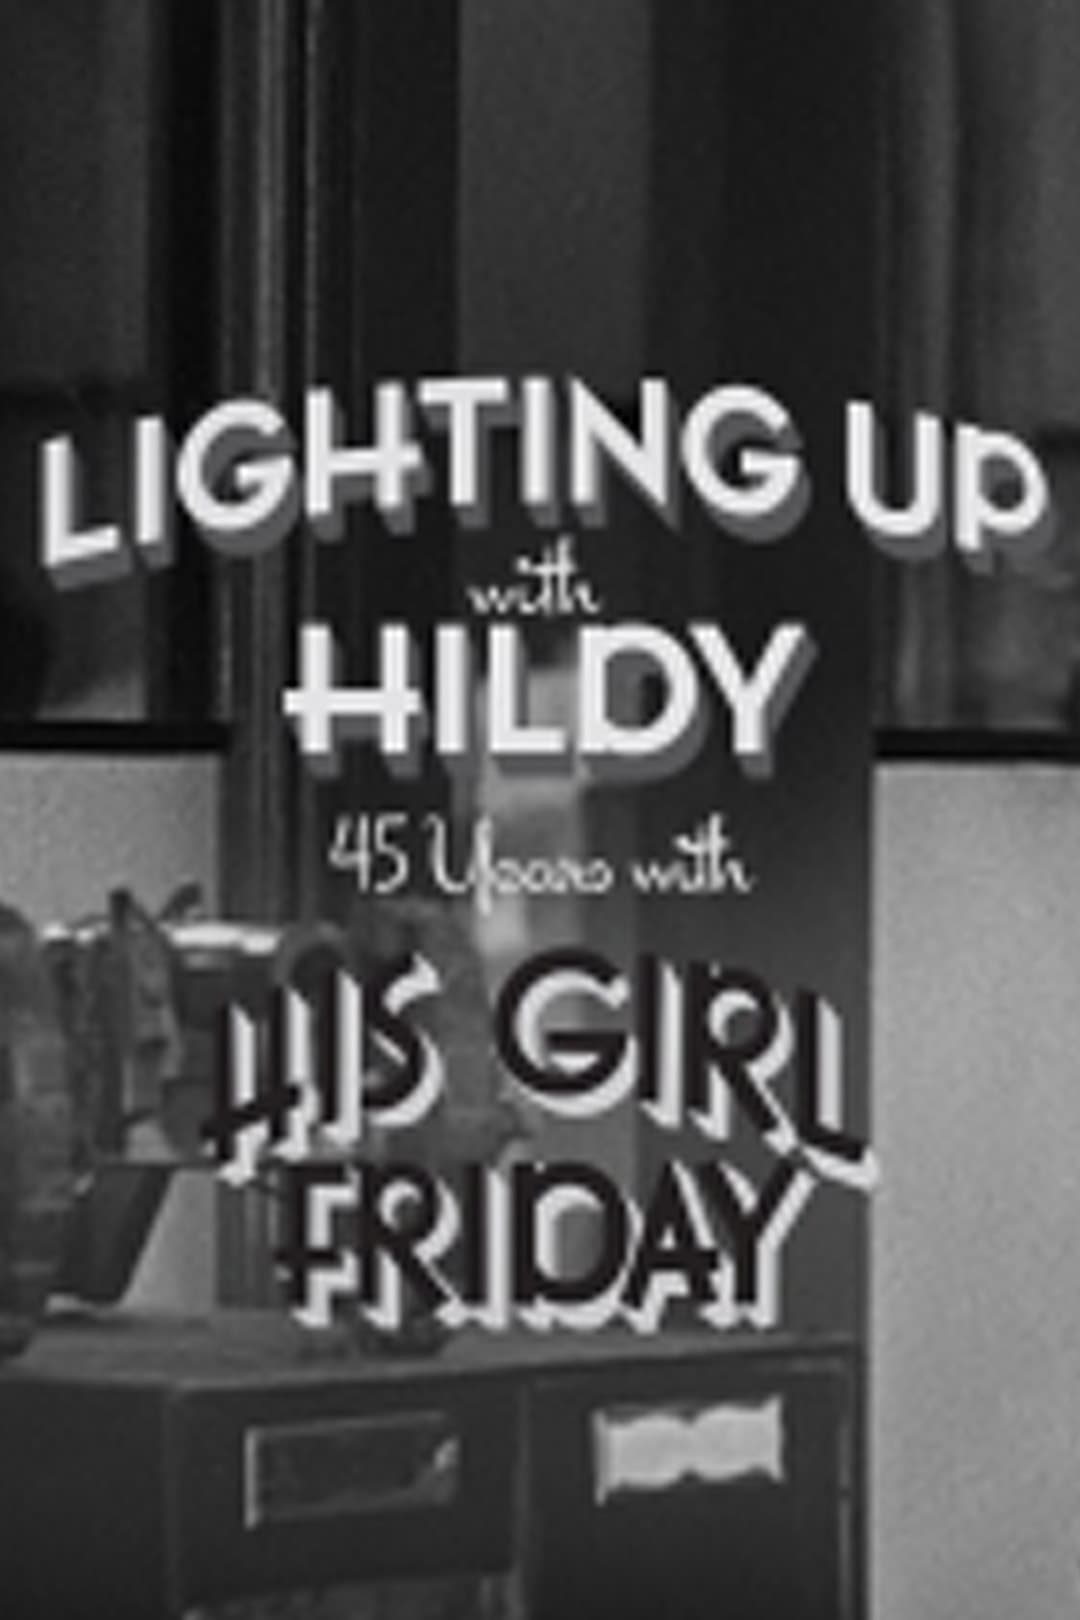 Lighting Up with Hildy Johnson